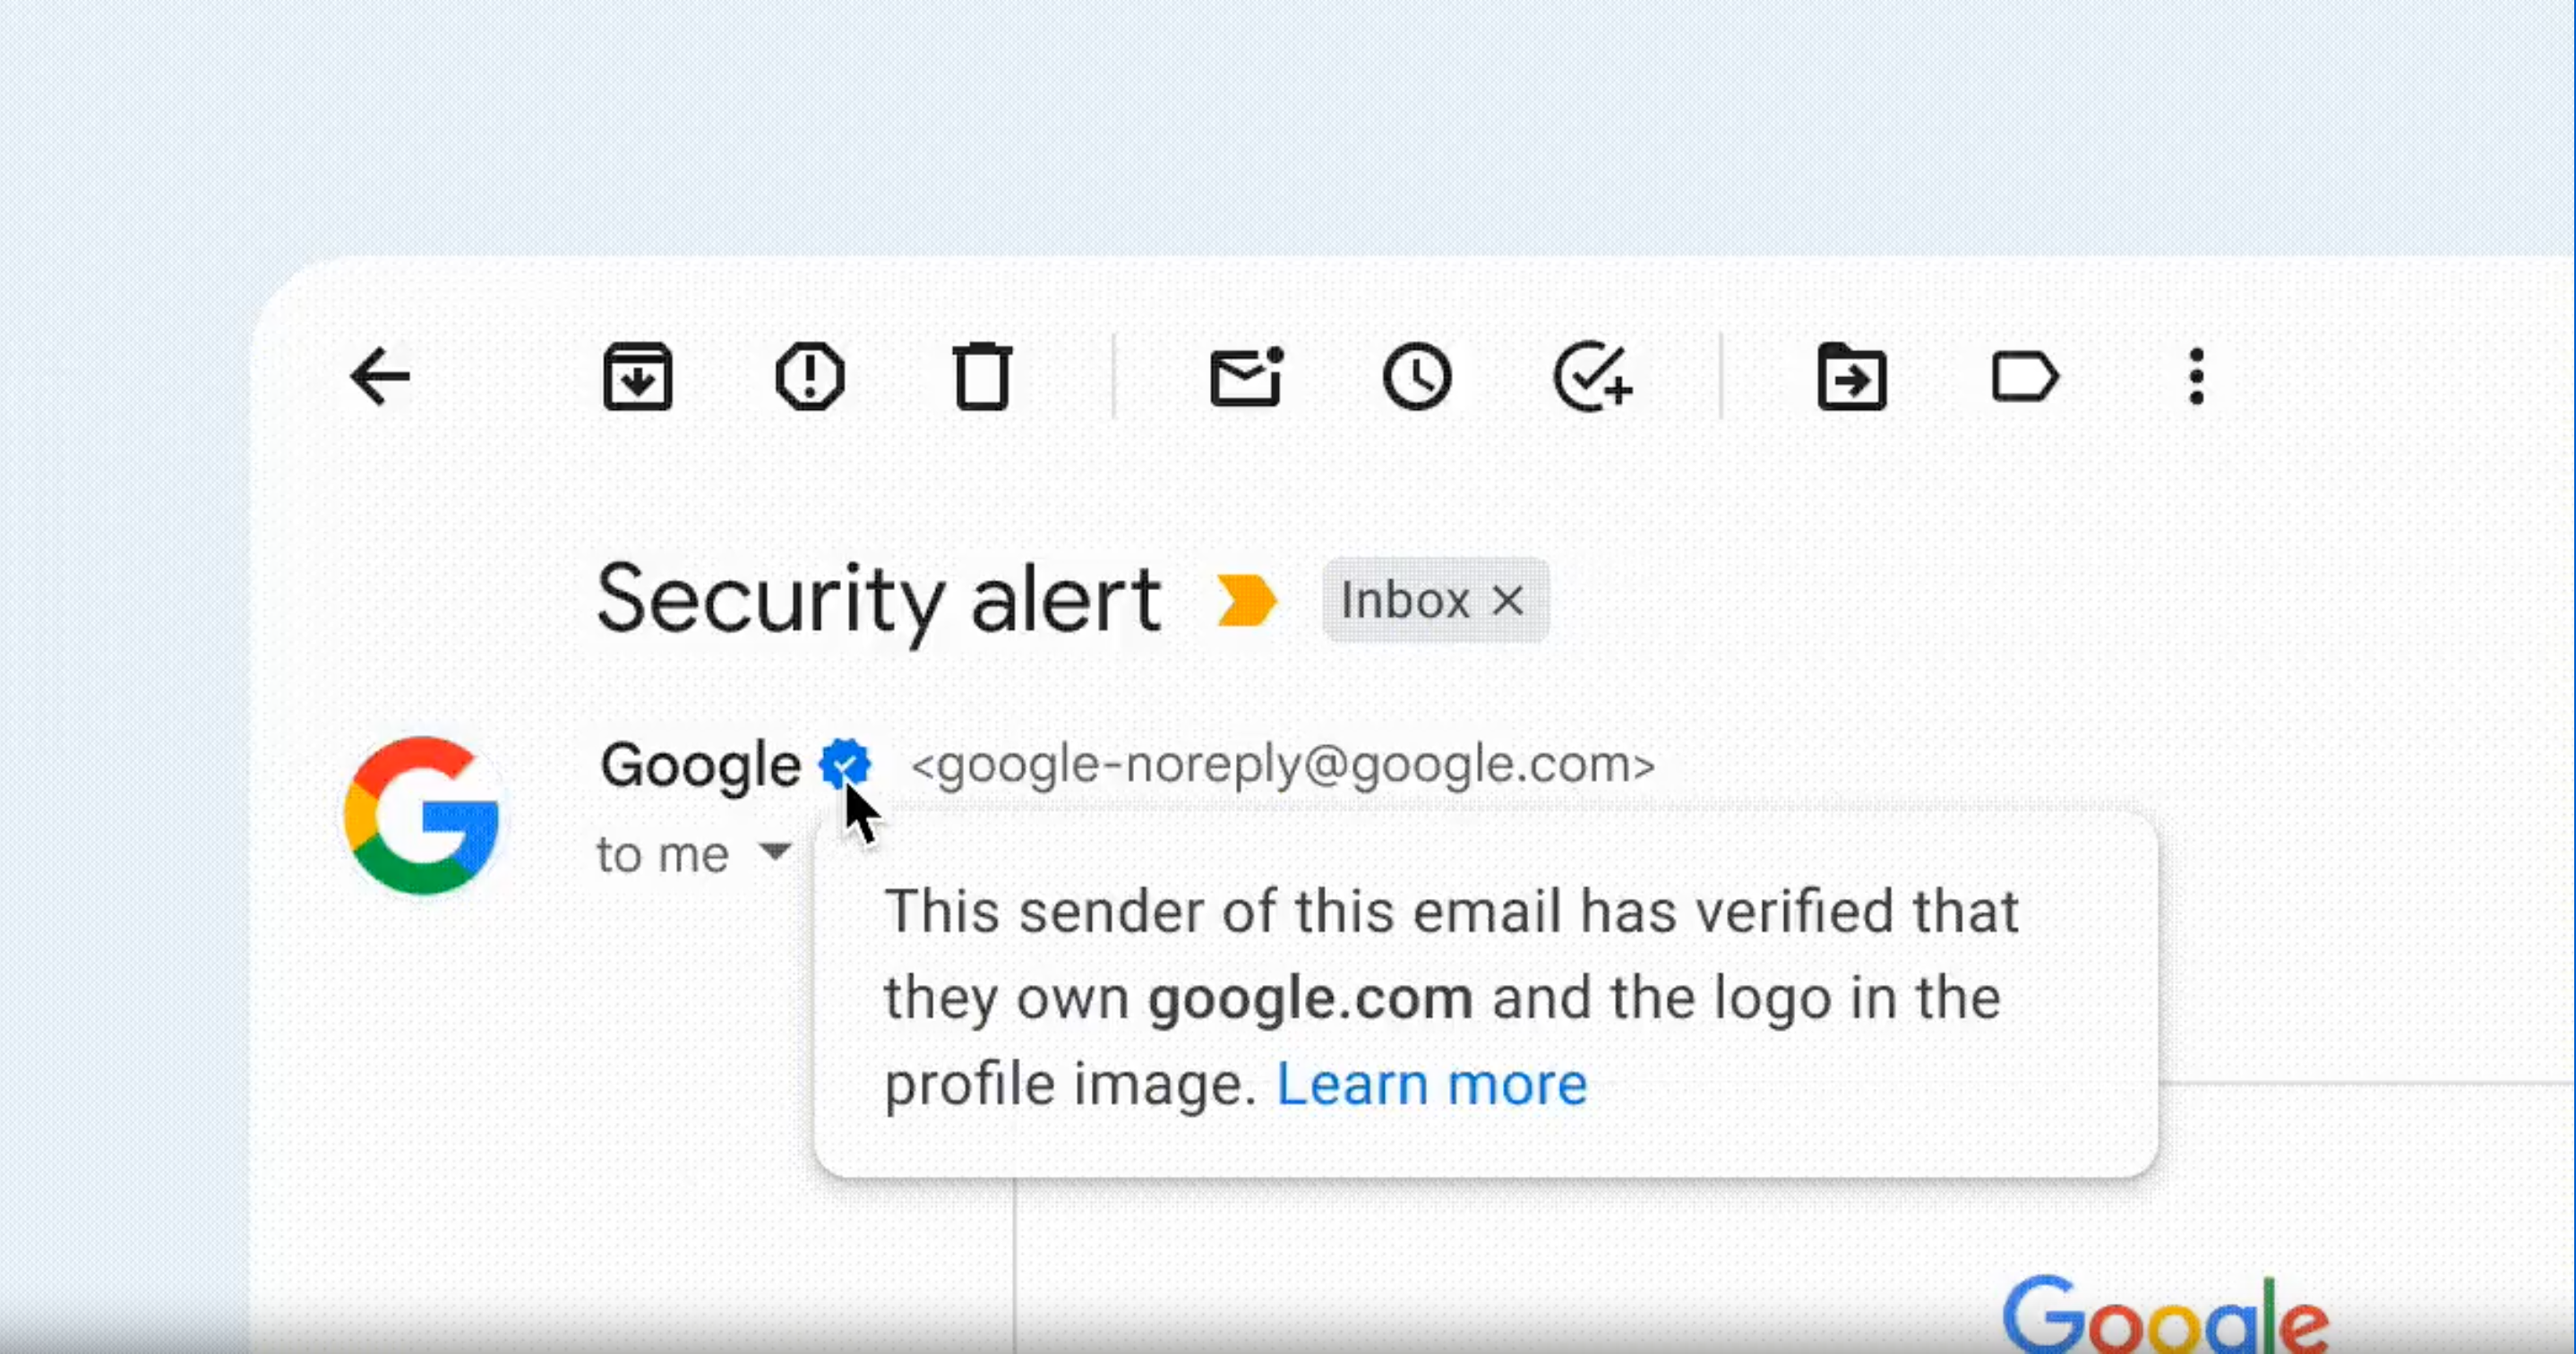 Google Introduces Blue Checkmark Feature in Gmail to Enhance Email Security